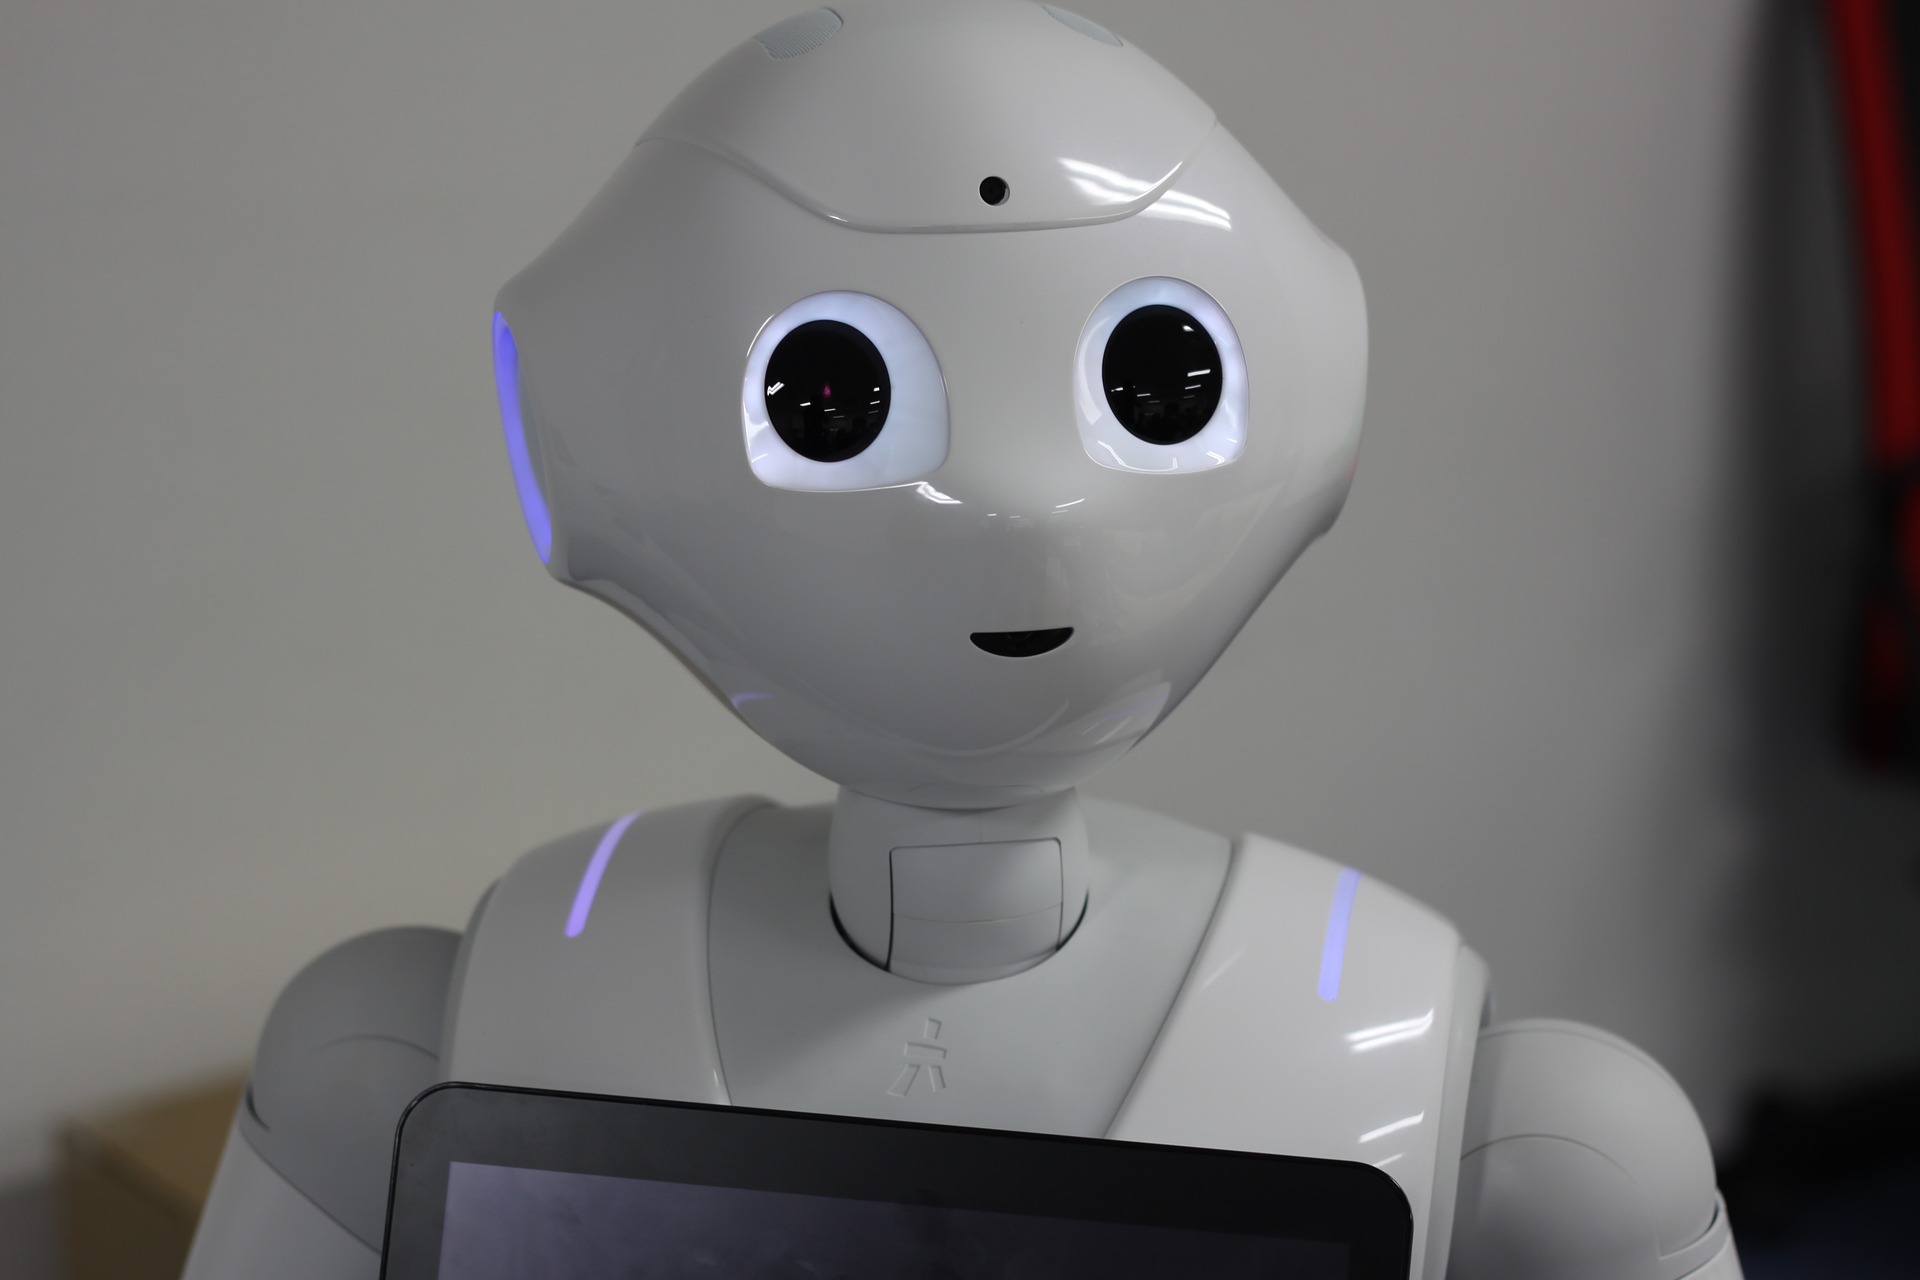 The Value and Meaning of a “Useless” Robot: An Ethnographic Study of Japanese Communication Robots - Institut für Japanstudien